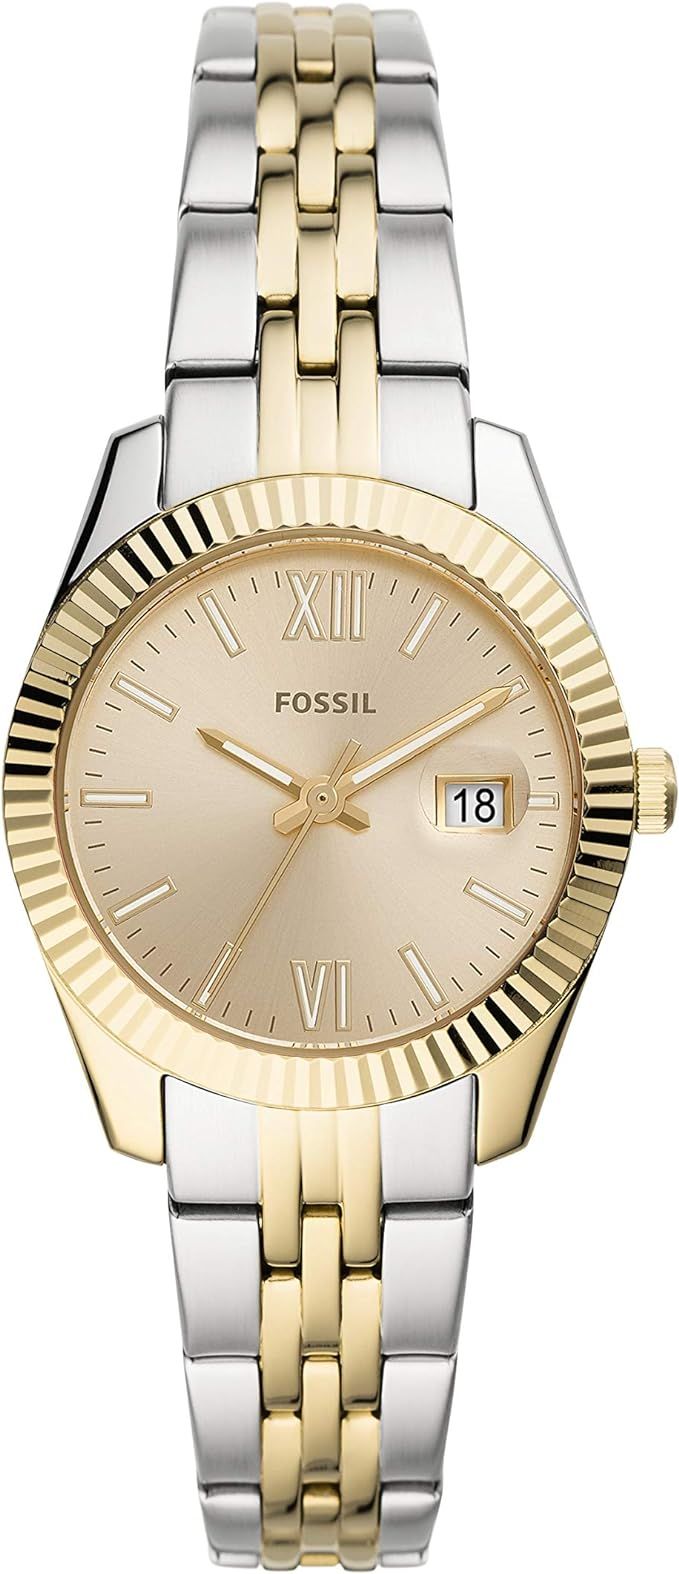 Fossil Scarlette Women's Sports Watch with Stainless Steel Bracelet or Genuine Leather Band | Amazon (US)